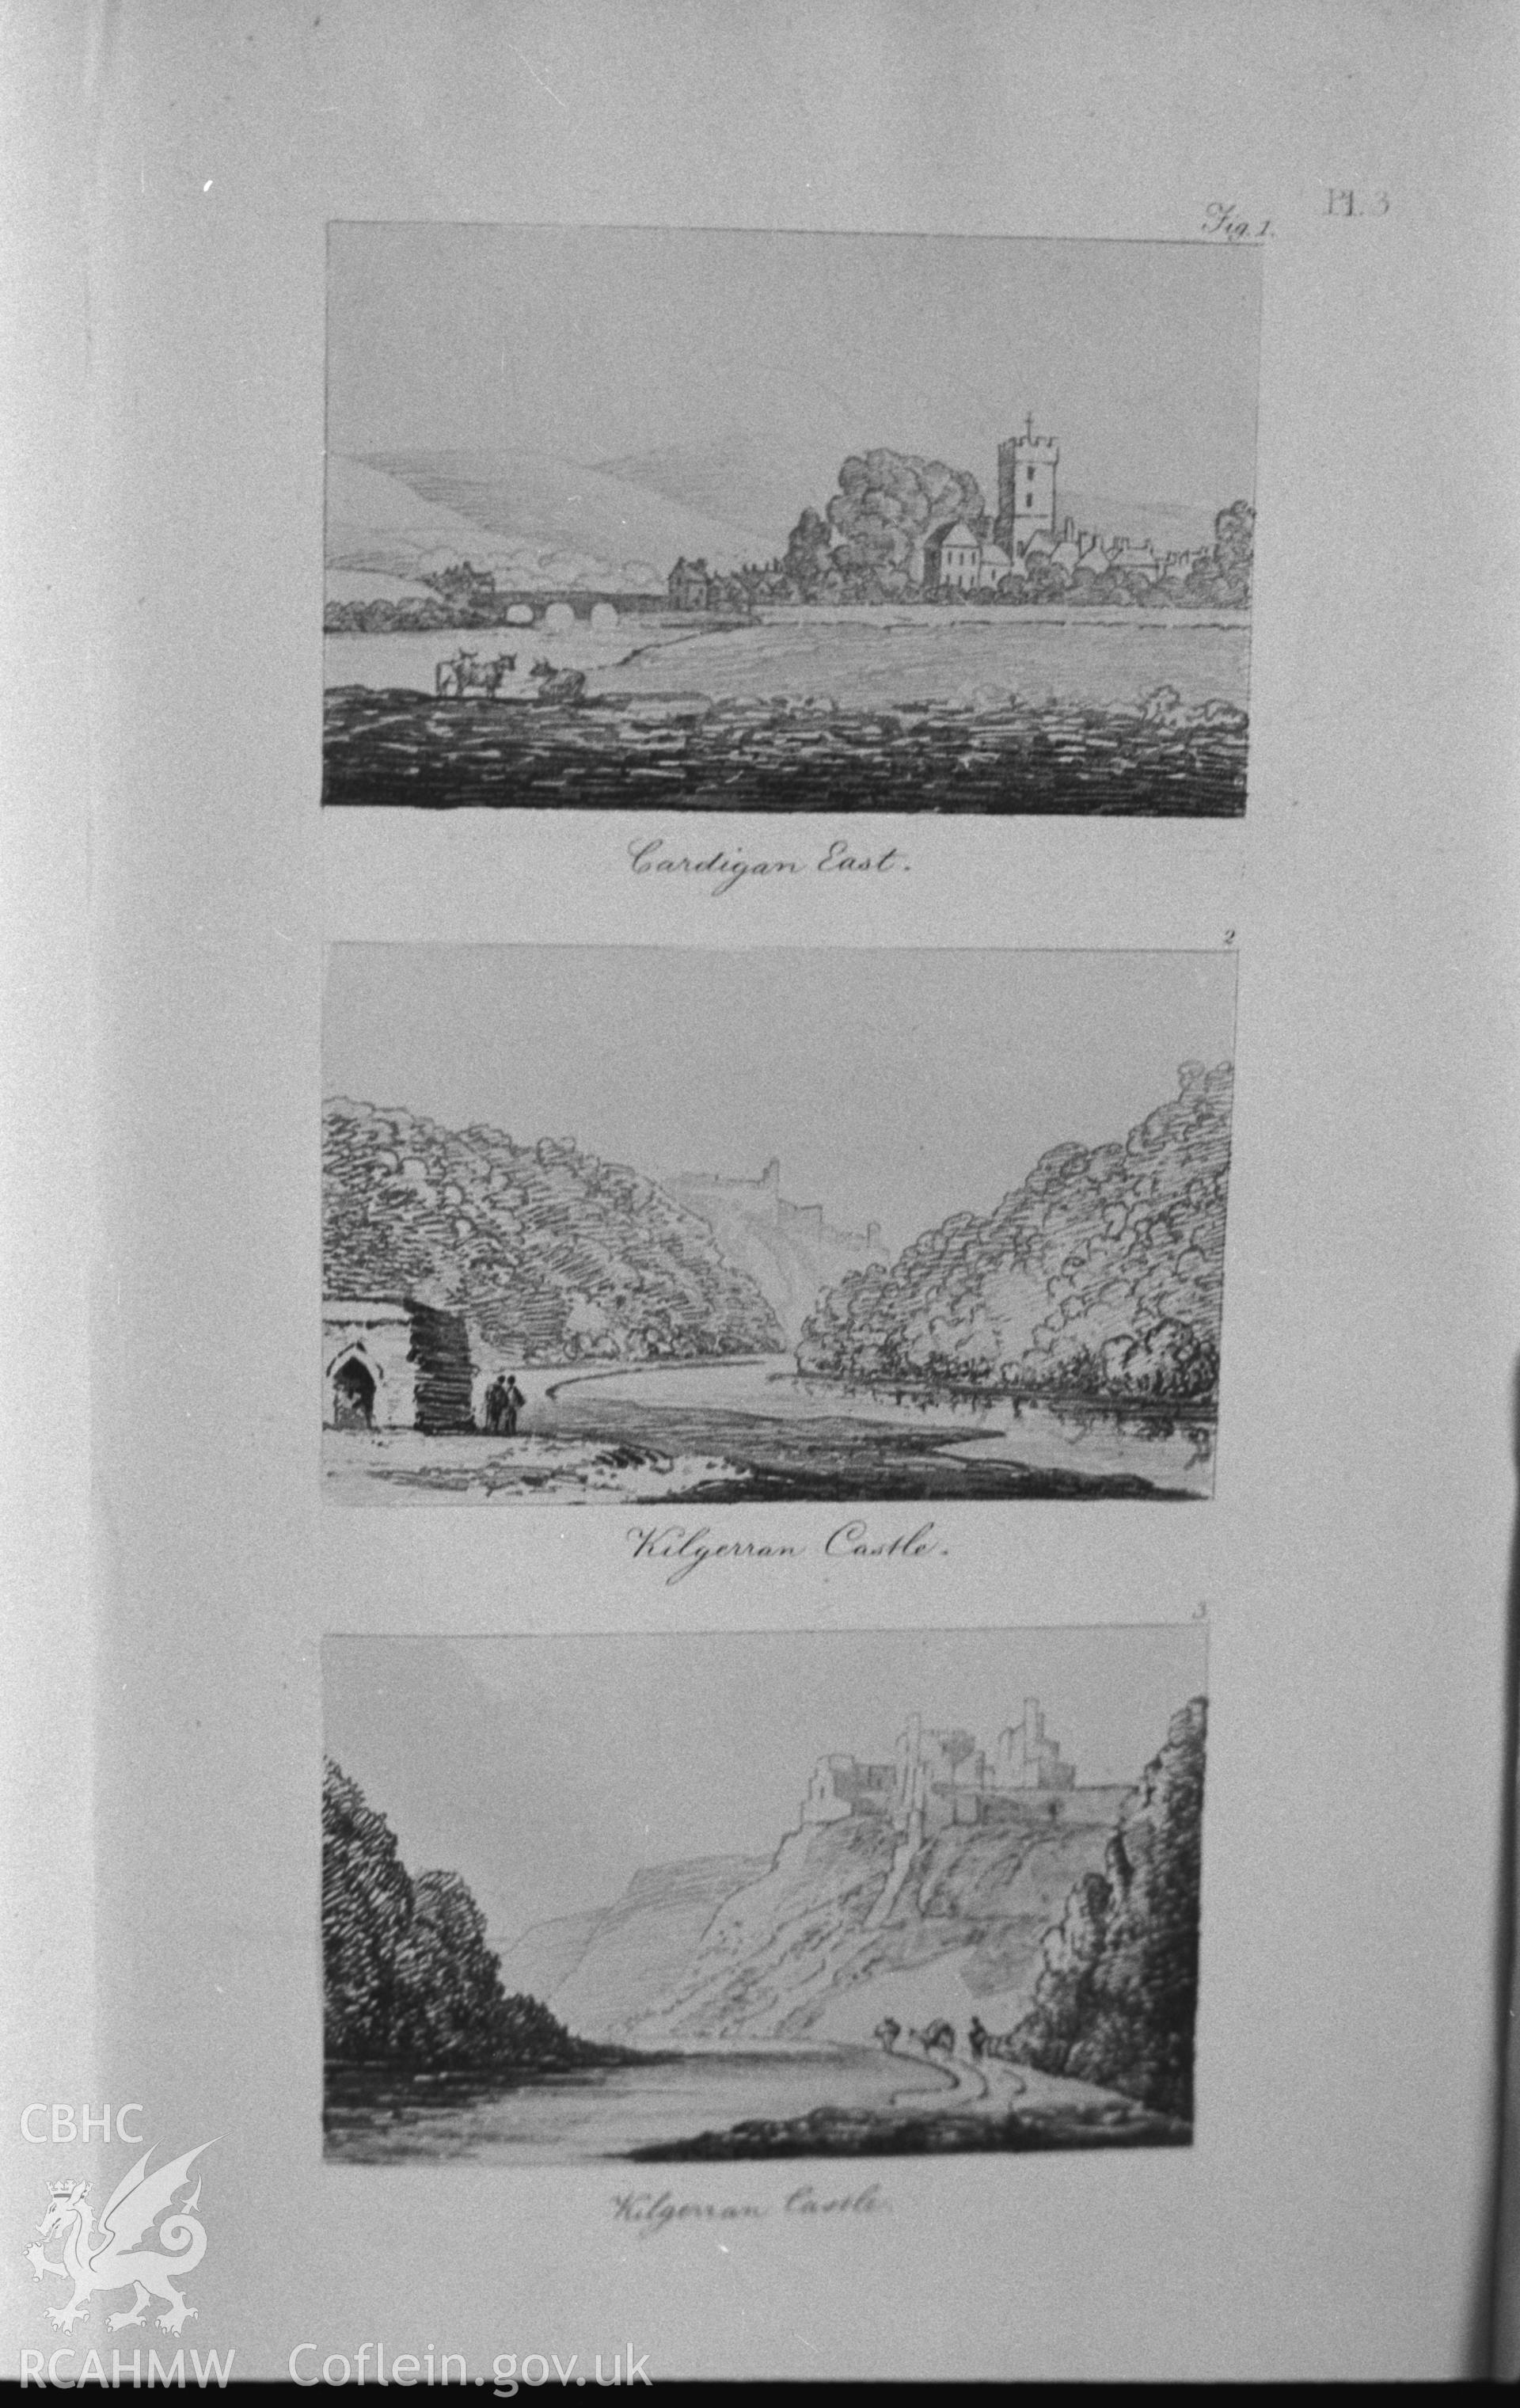 Black and white copy of page 3 engravings entitled: 'Cardigan East' and 'Kilgerran Castle.' Photographed by Arthur O. Chater in January 1968 for his own private research.